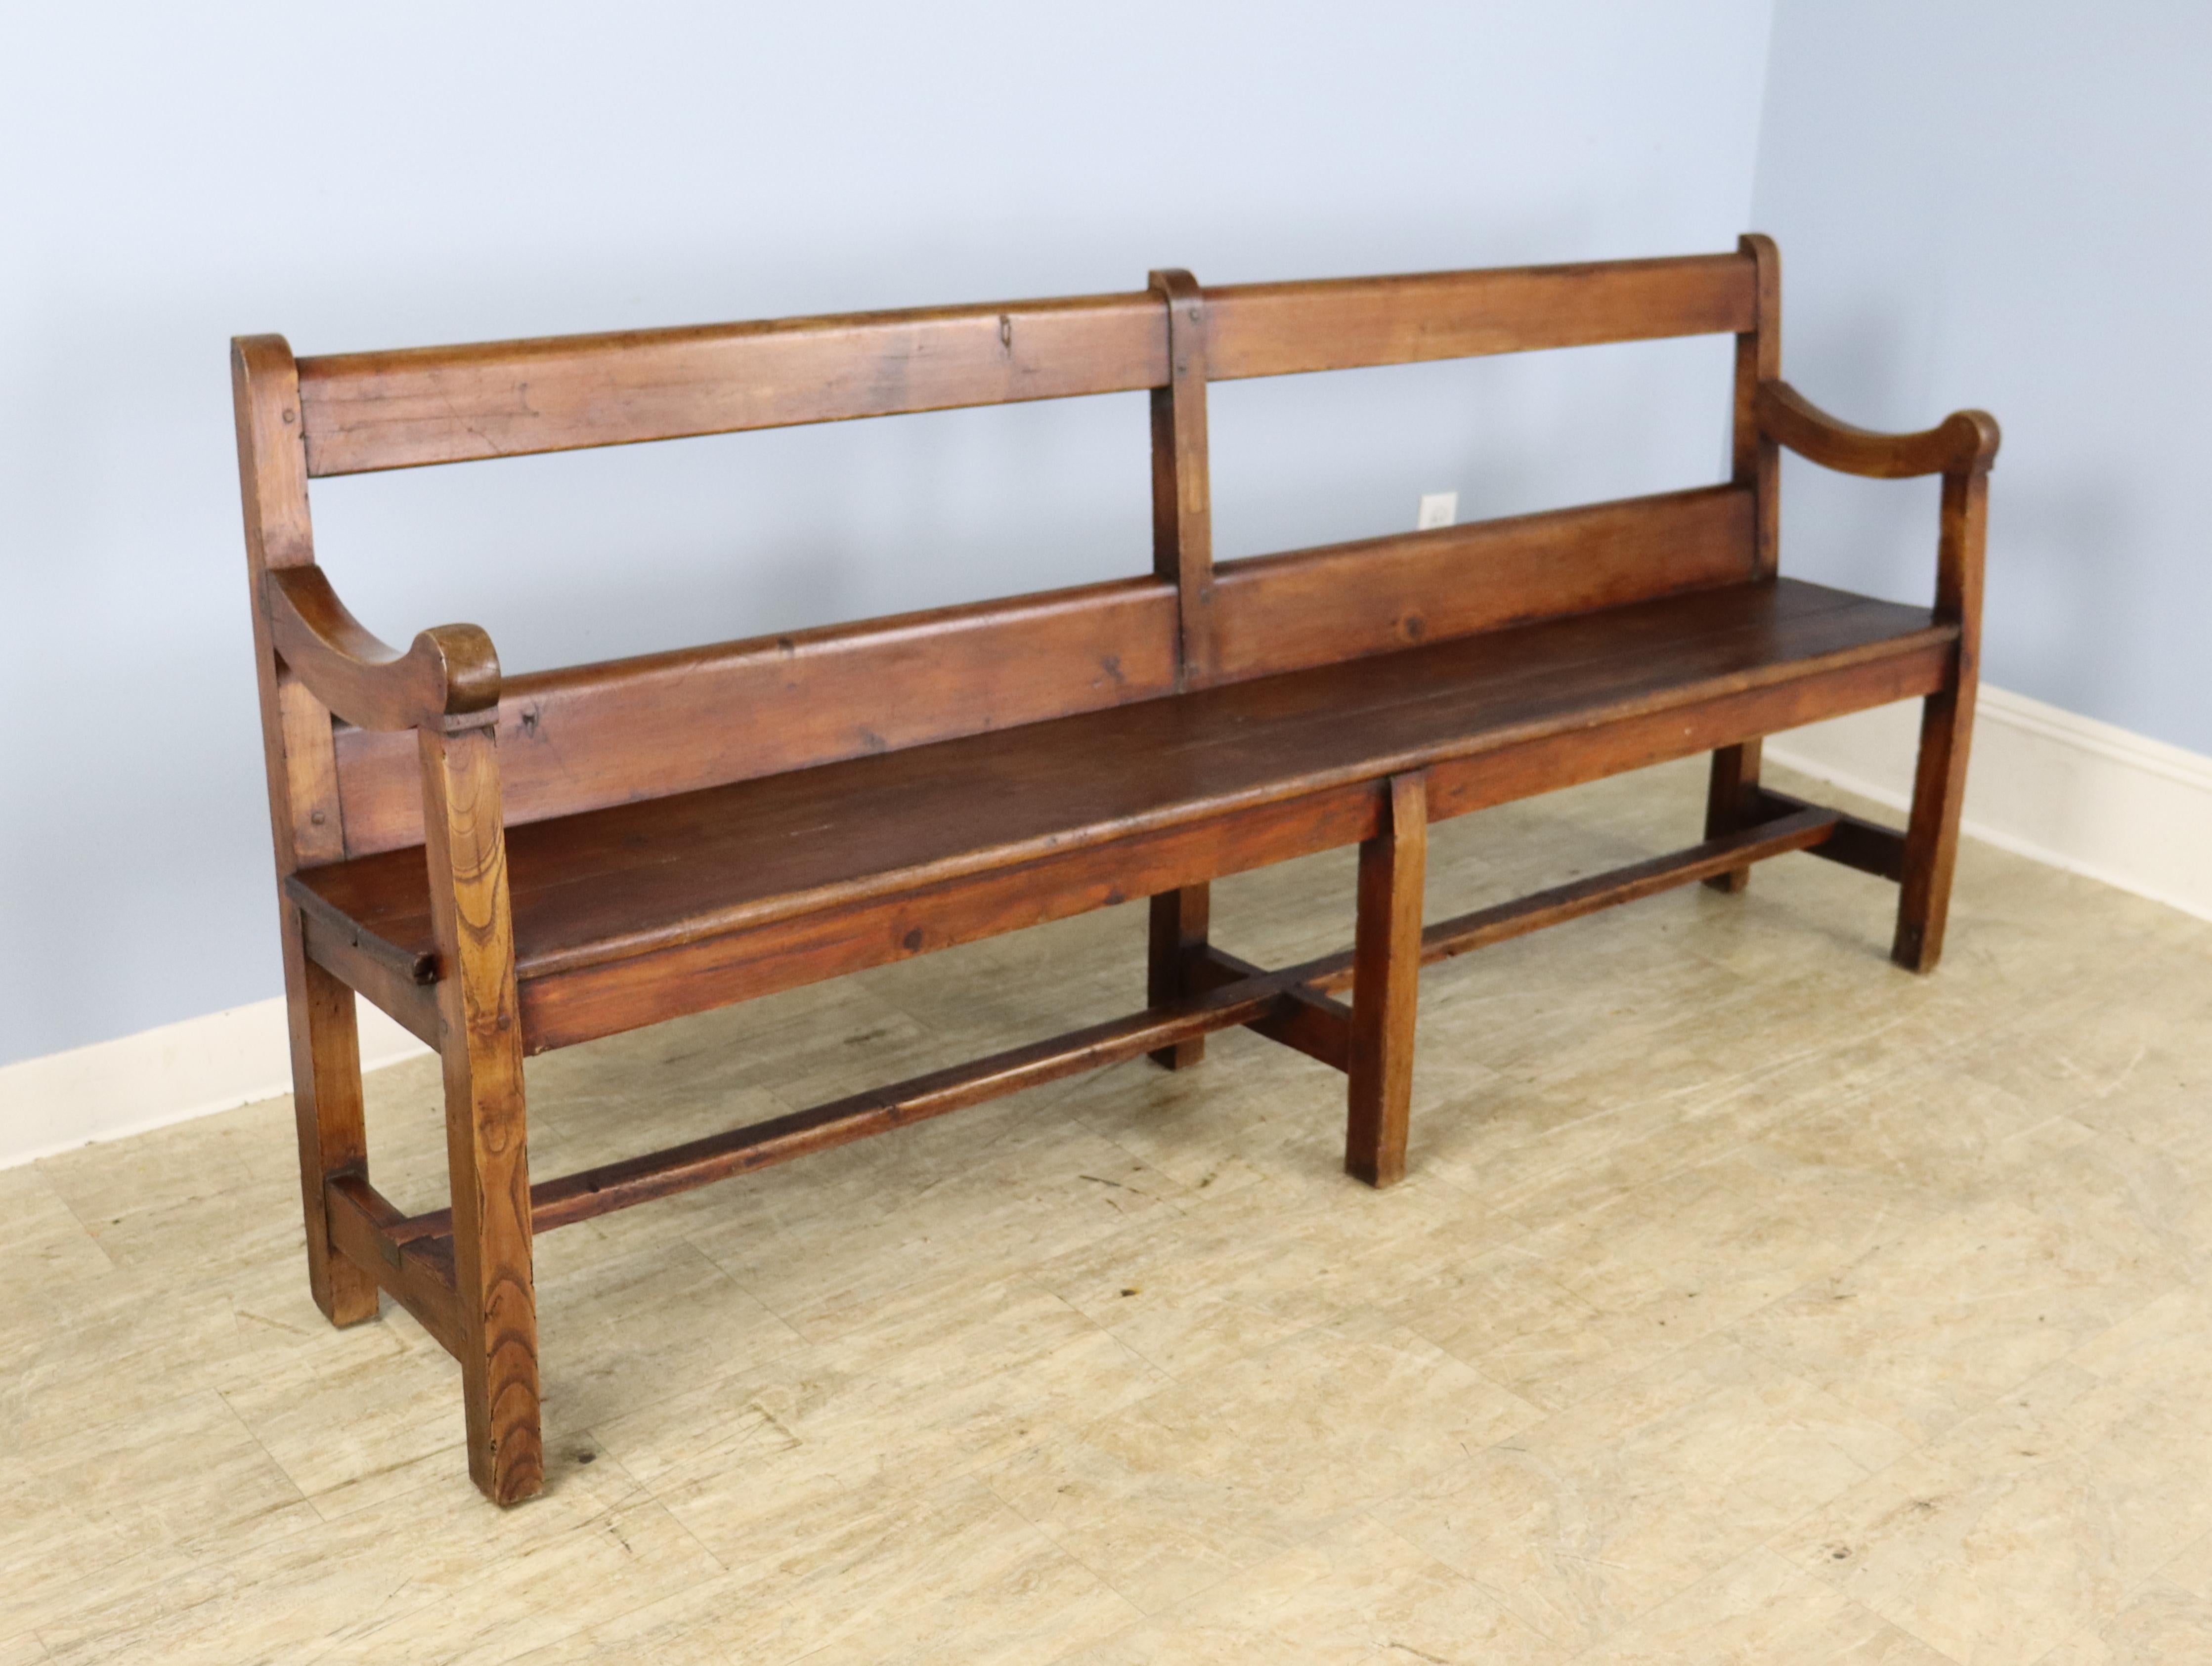 A long bench with a simple silhouette in study pine. Both the color and grain are very good, as is the patina. The profile has a slight recline which makes the piece more comfortable. No wobbles!